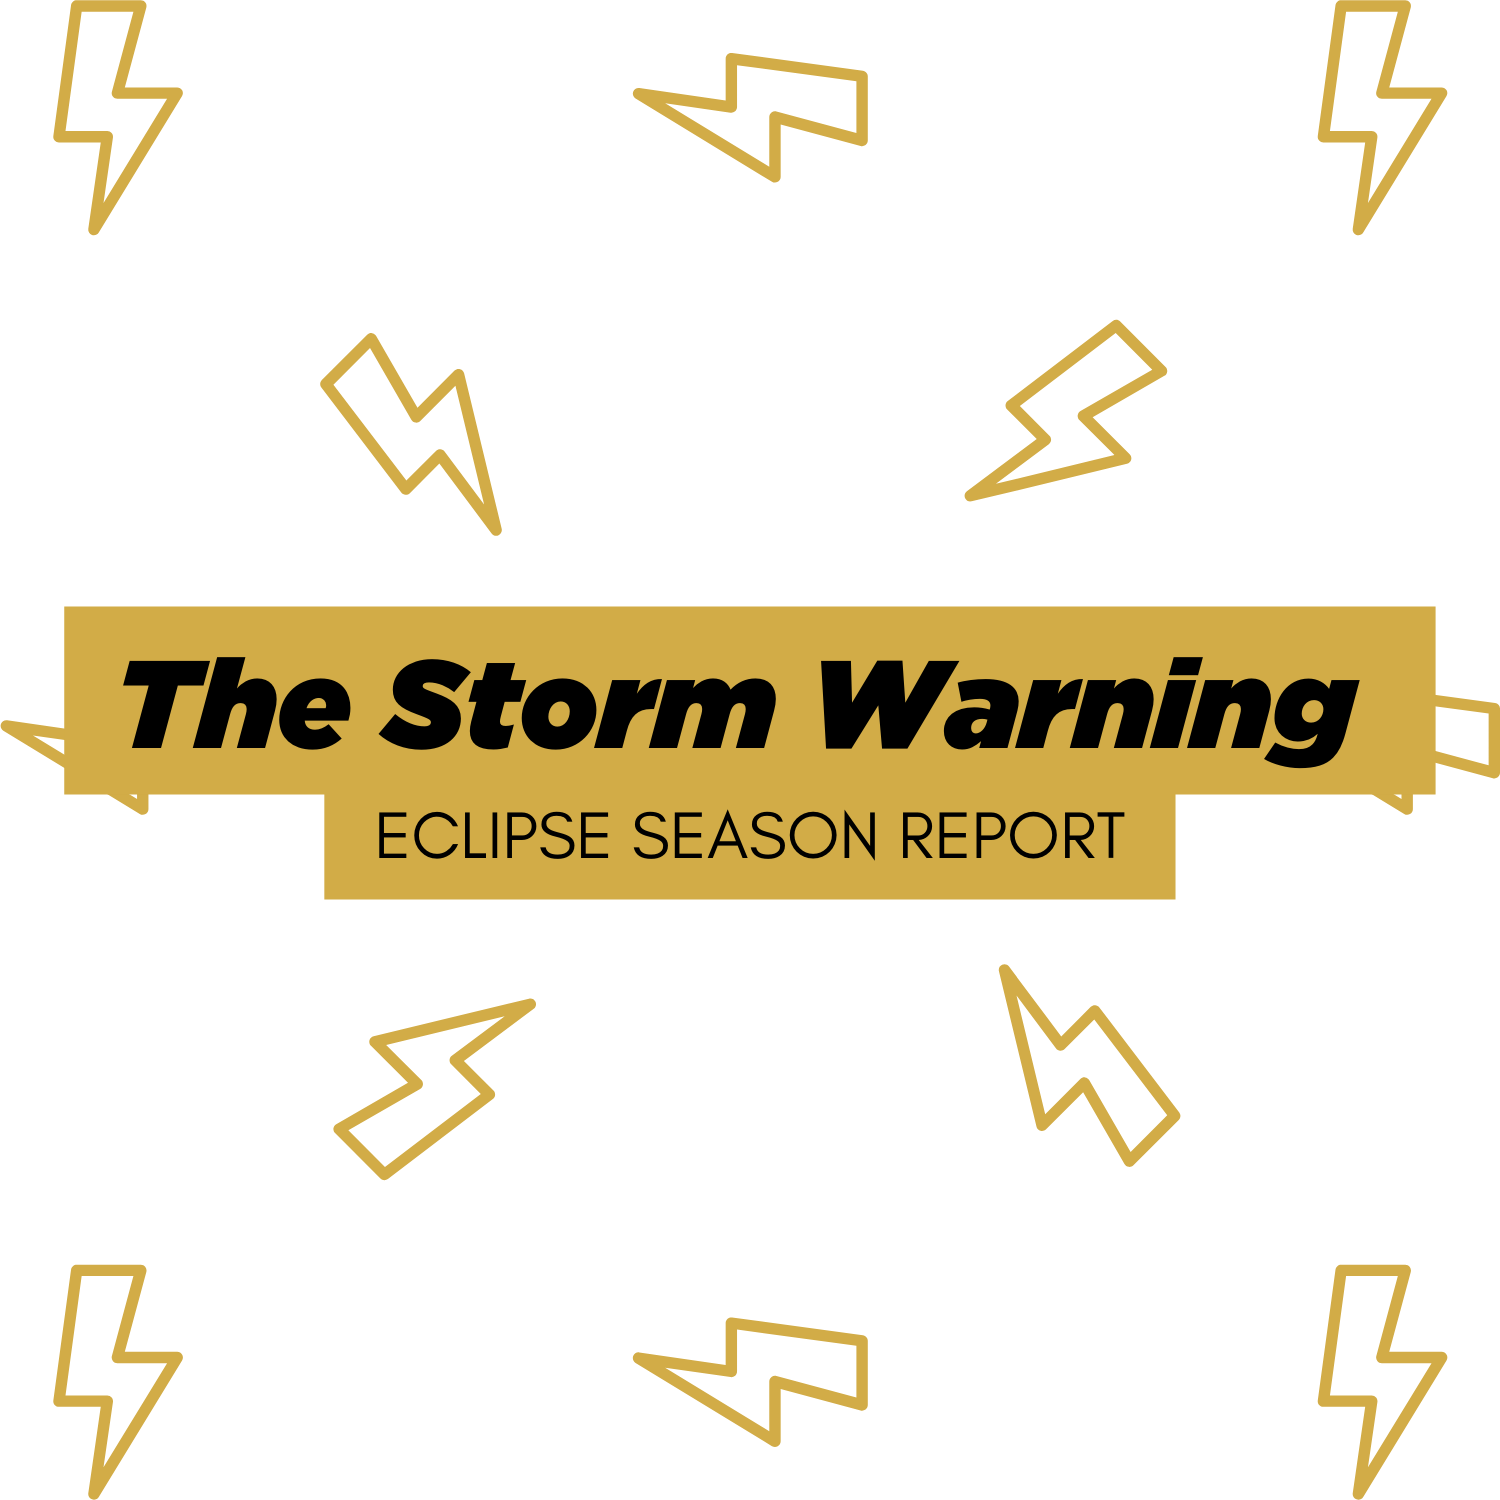 The Storm Warning | Eclipse Season Report